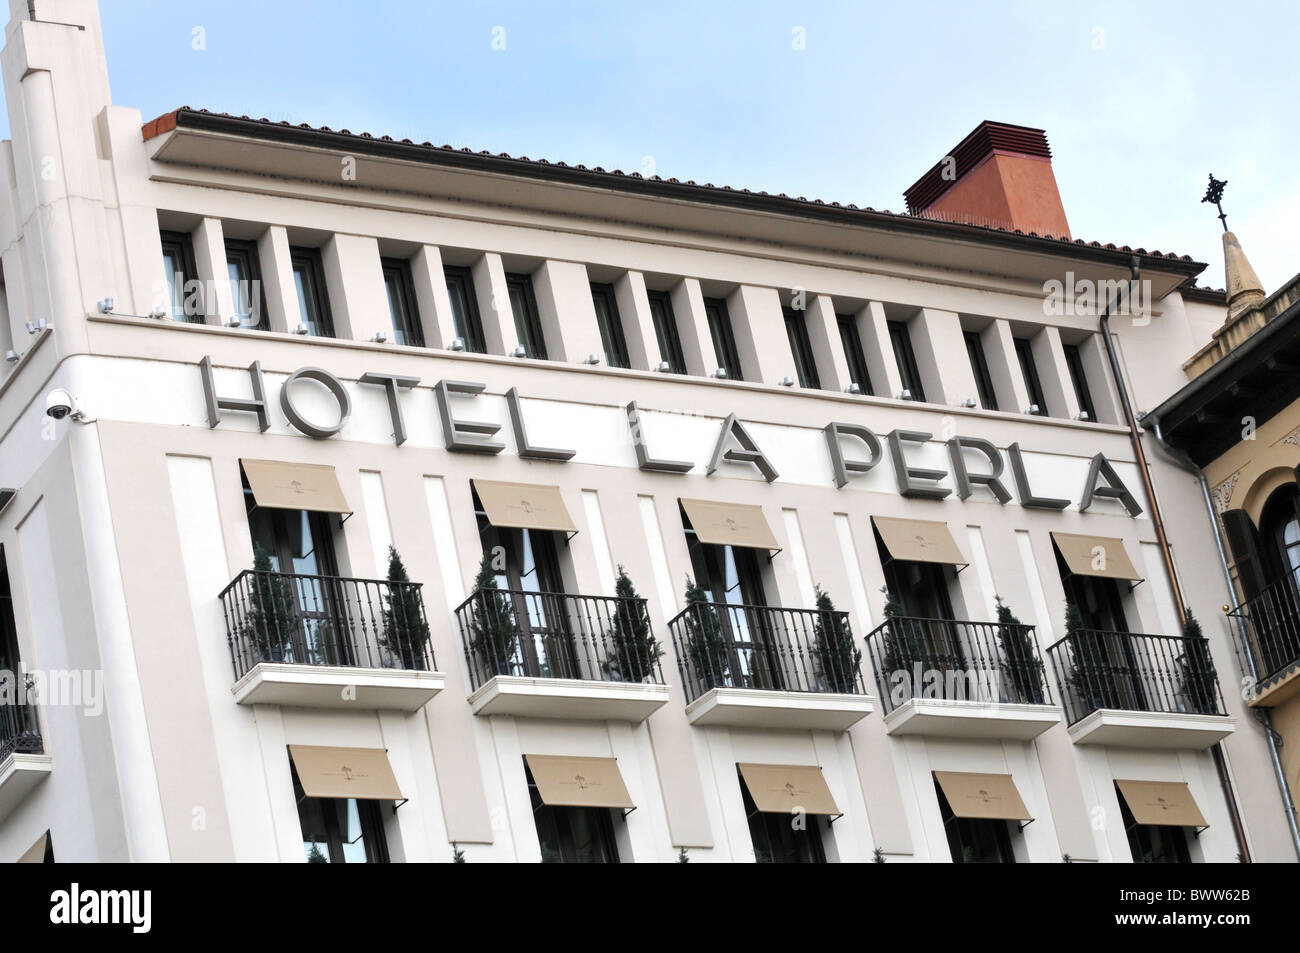 La Perla High Resolution Stock Photography and Images - Alamy